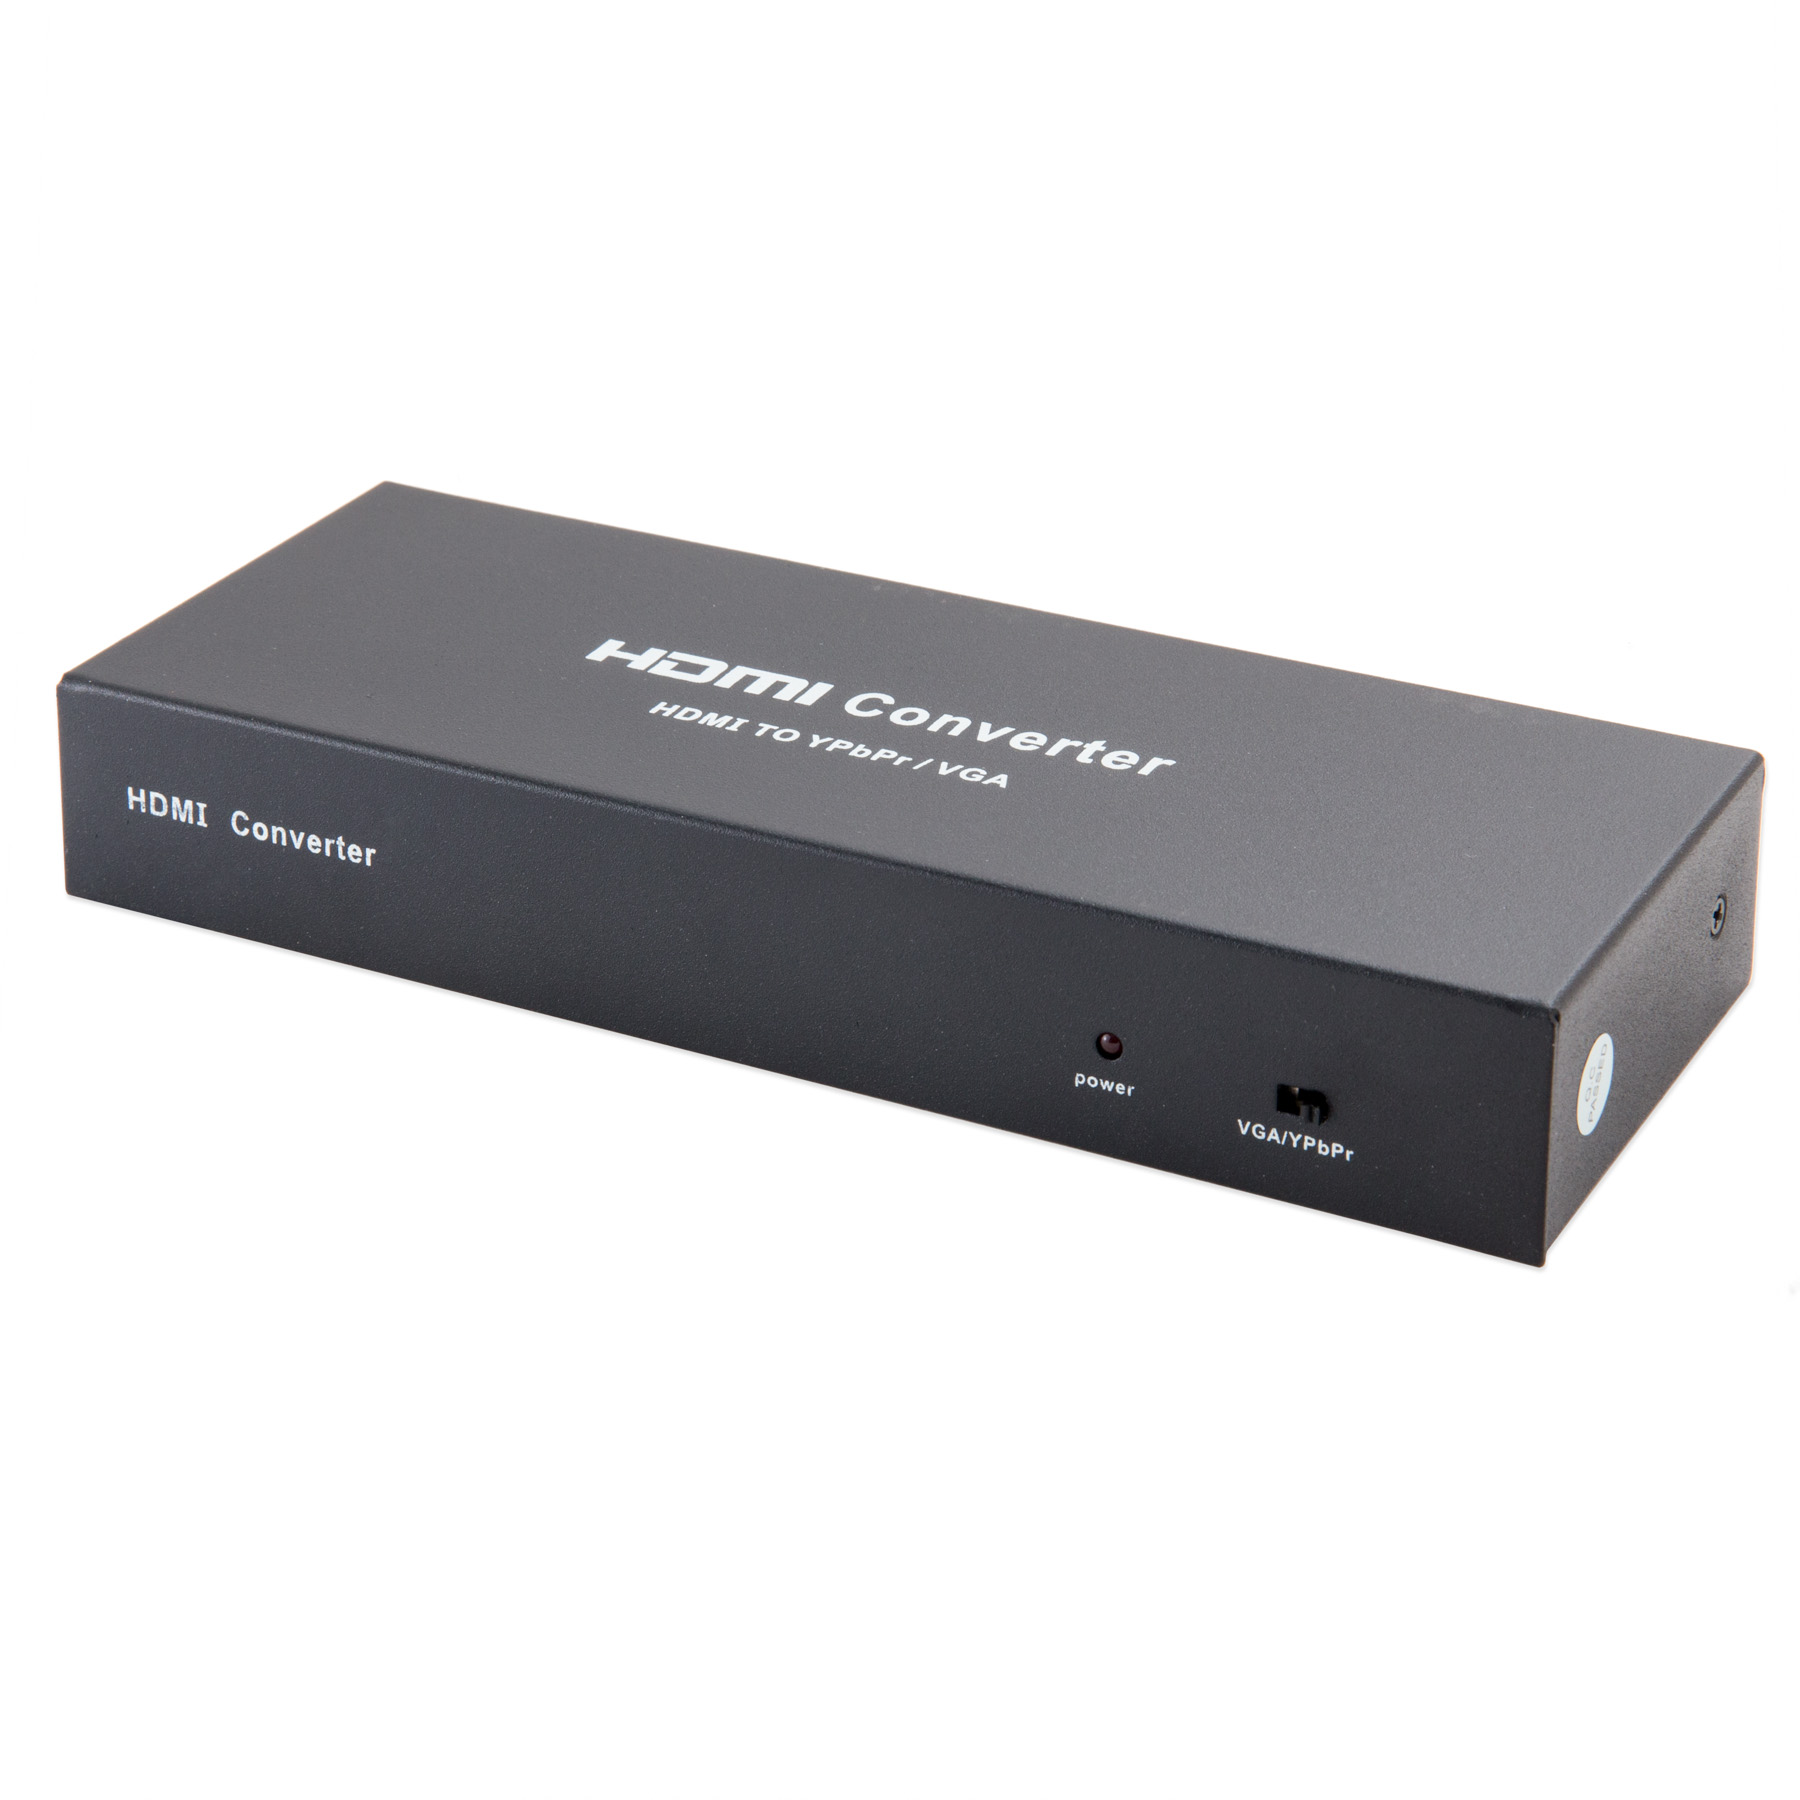 HDMI to VGA+YPbPr+Audio Converter, Input Signal Connection (HDMI), Output Signal Connections (YPbPr, VGA), Output Audio Connections (L/R Analog, SPDIF), Video Output up to 1080p, Black Color - image 2 of 5